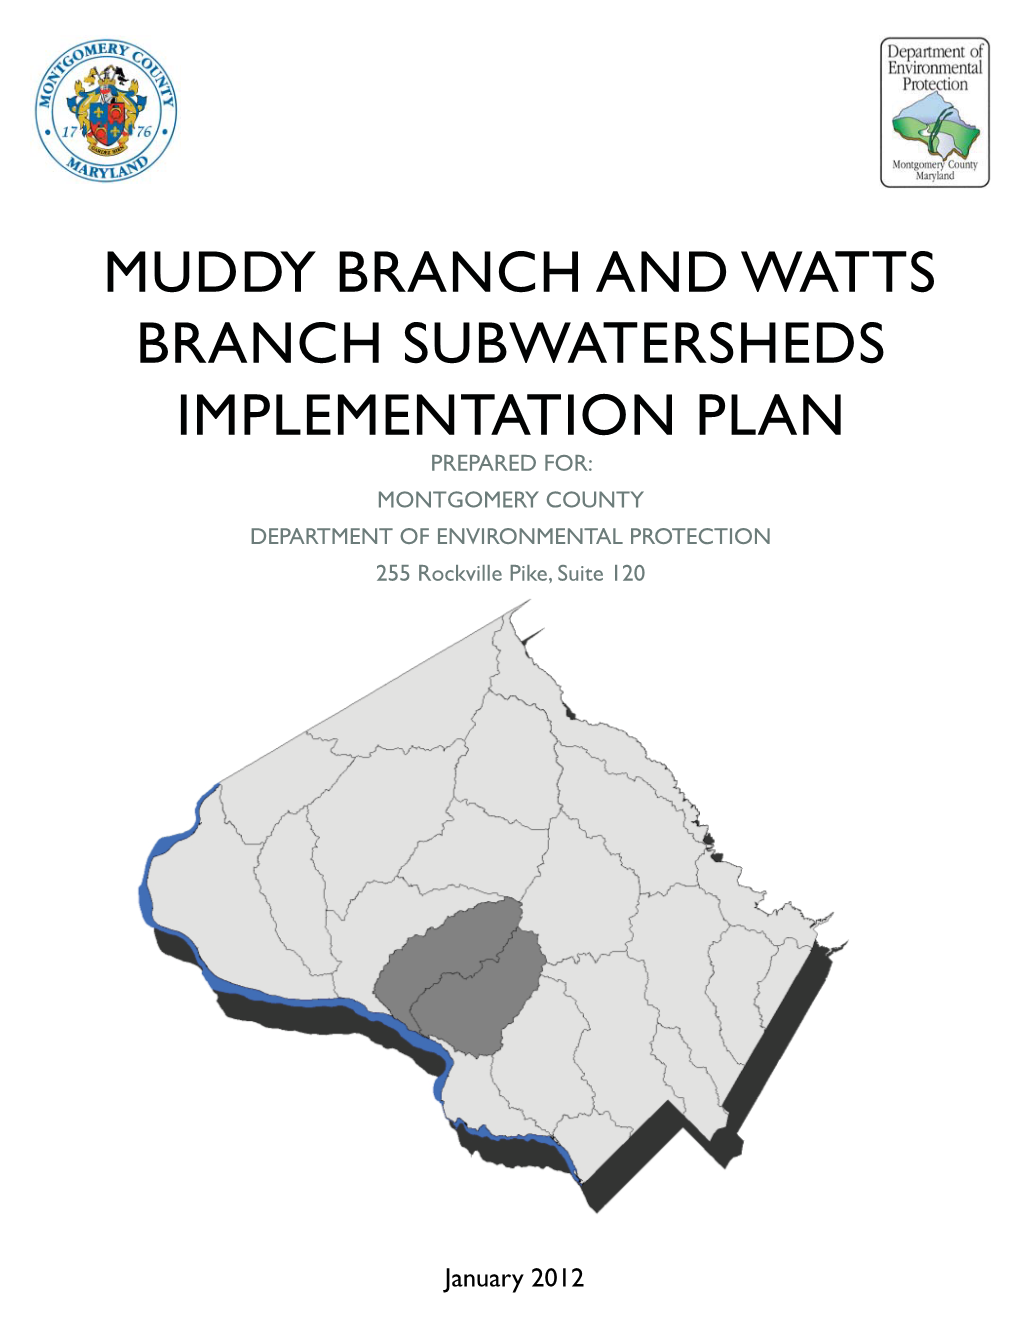 MUDDY BRANCH and WATTS BRANCH SUBWATERSHEDS IMPLEMENTATION PLAN PREPARED FOR: MONTGOMERY COUNTY DEPARTMENT of ENVIRONMENTAL PROTECTION 255 Rockville Pike, Suite 120